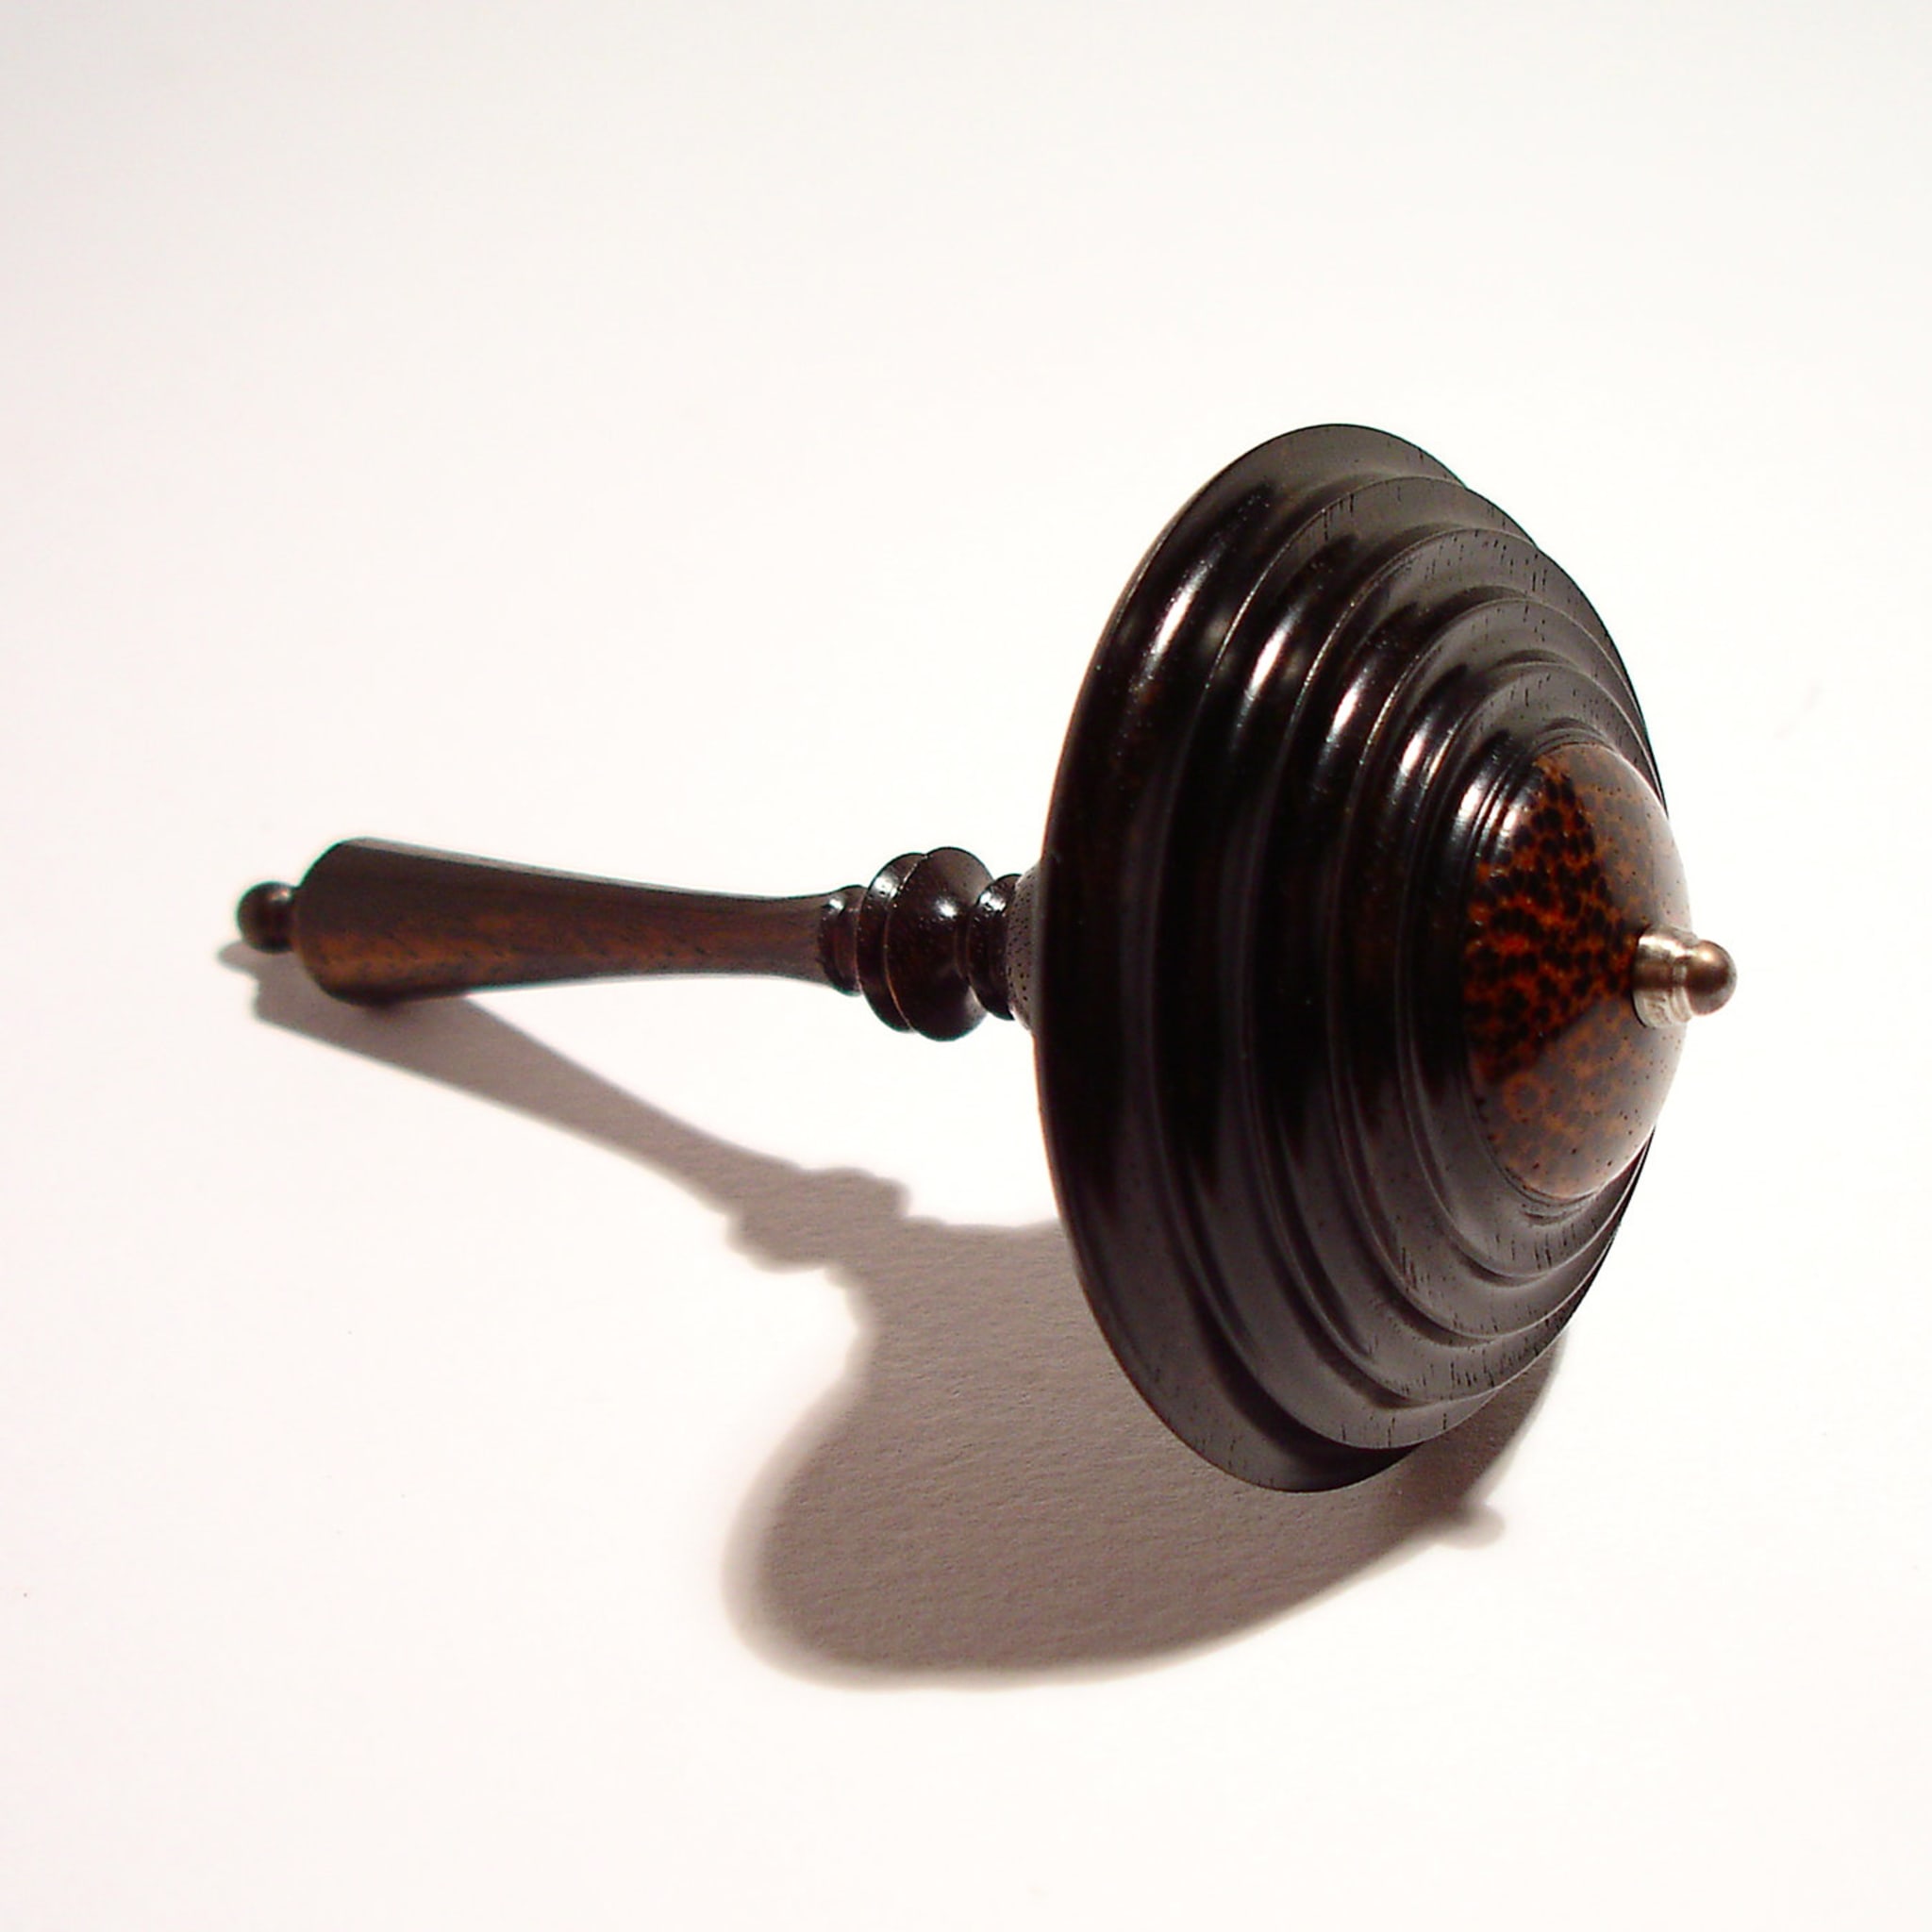 DarkStyle Spinning Top in Ebony and Black Palm - Alternative view 3